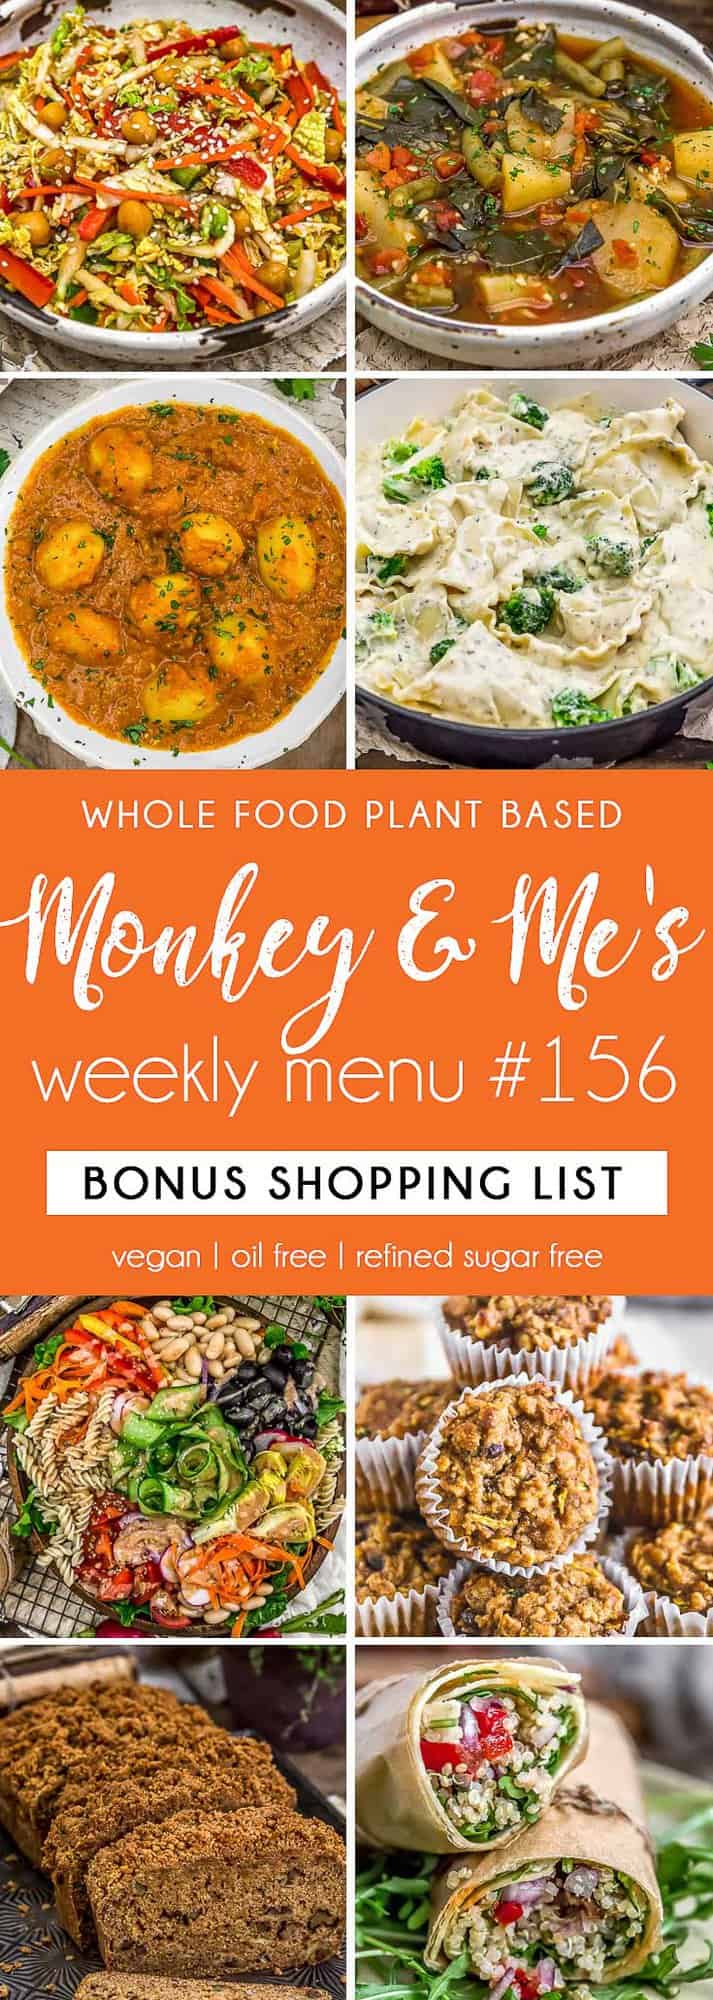 Monkey and Me's Menu 156 featuring 8 recipes